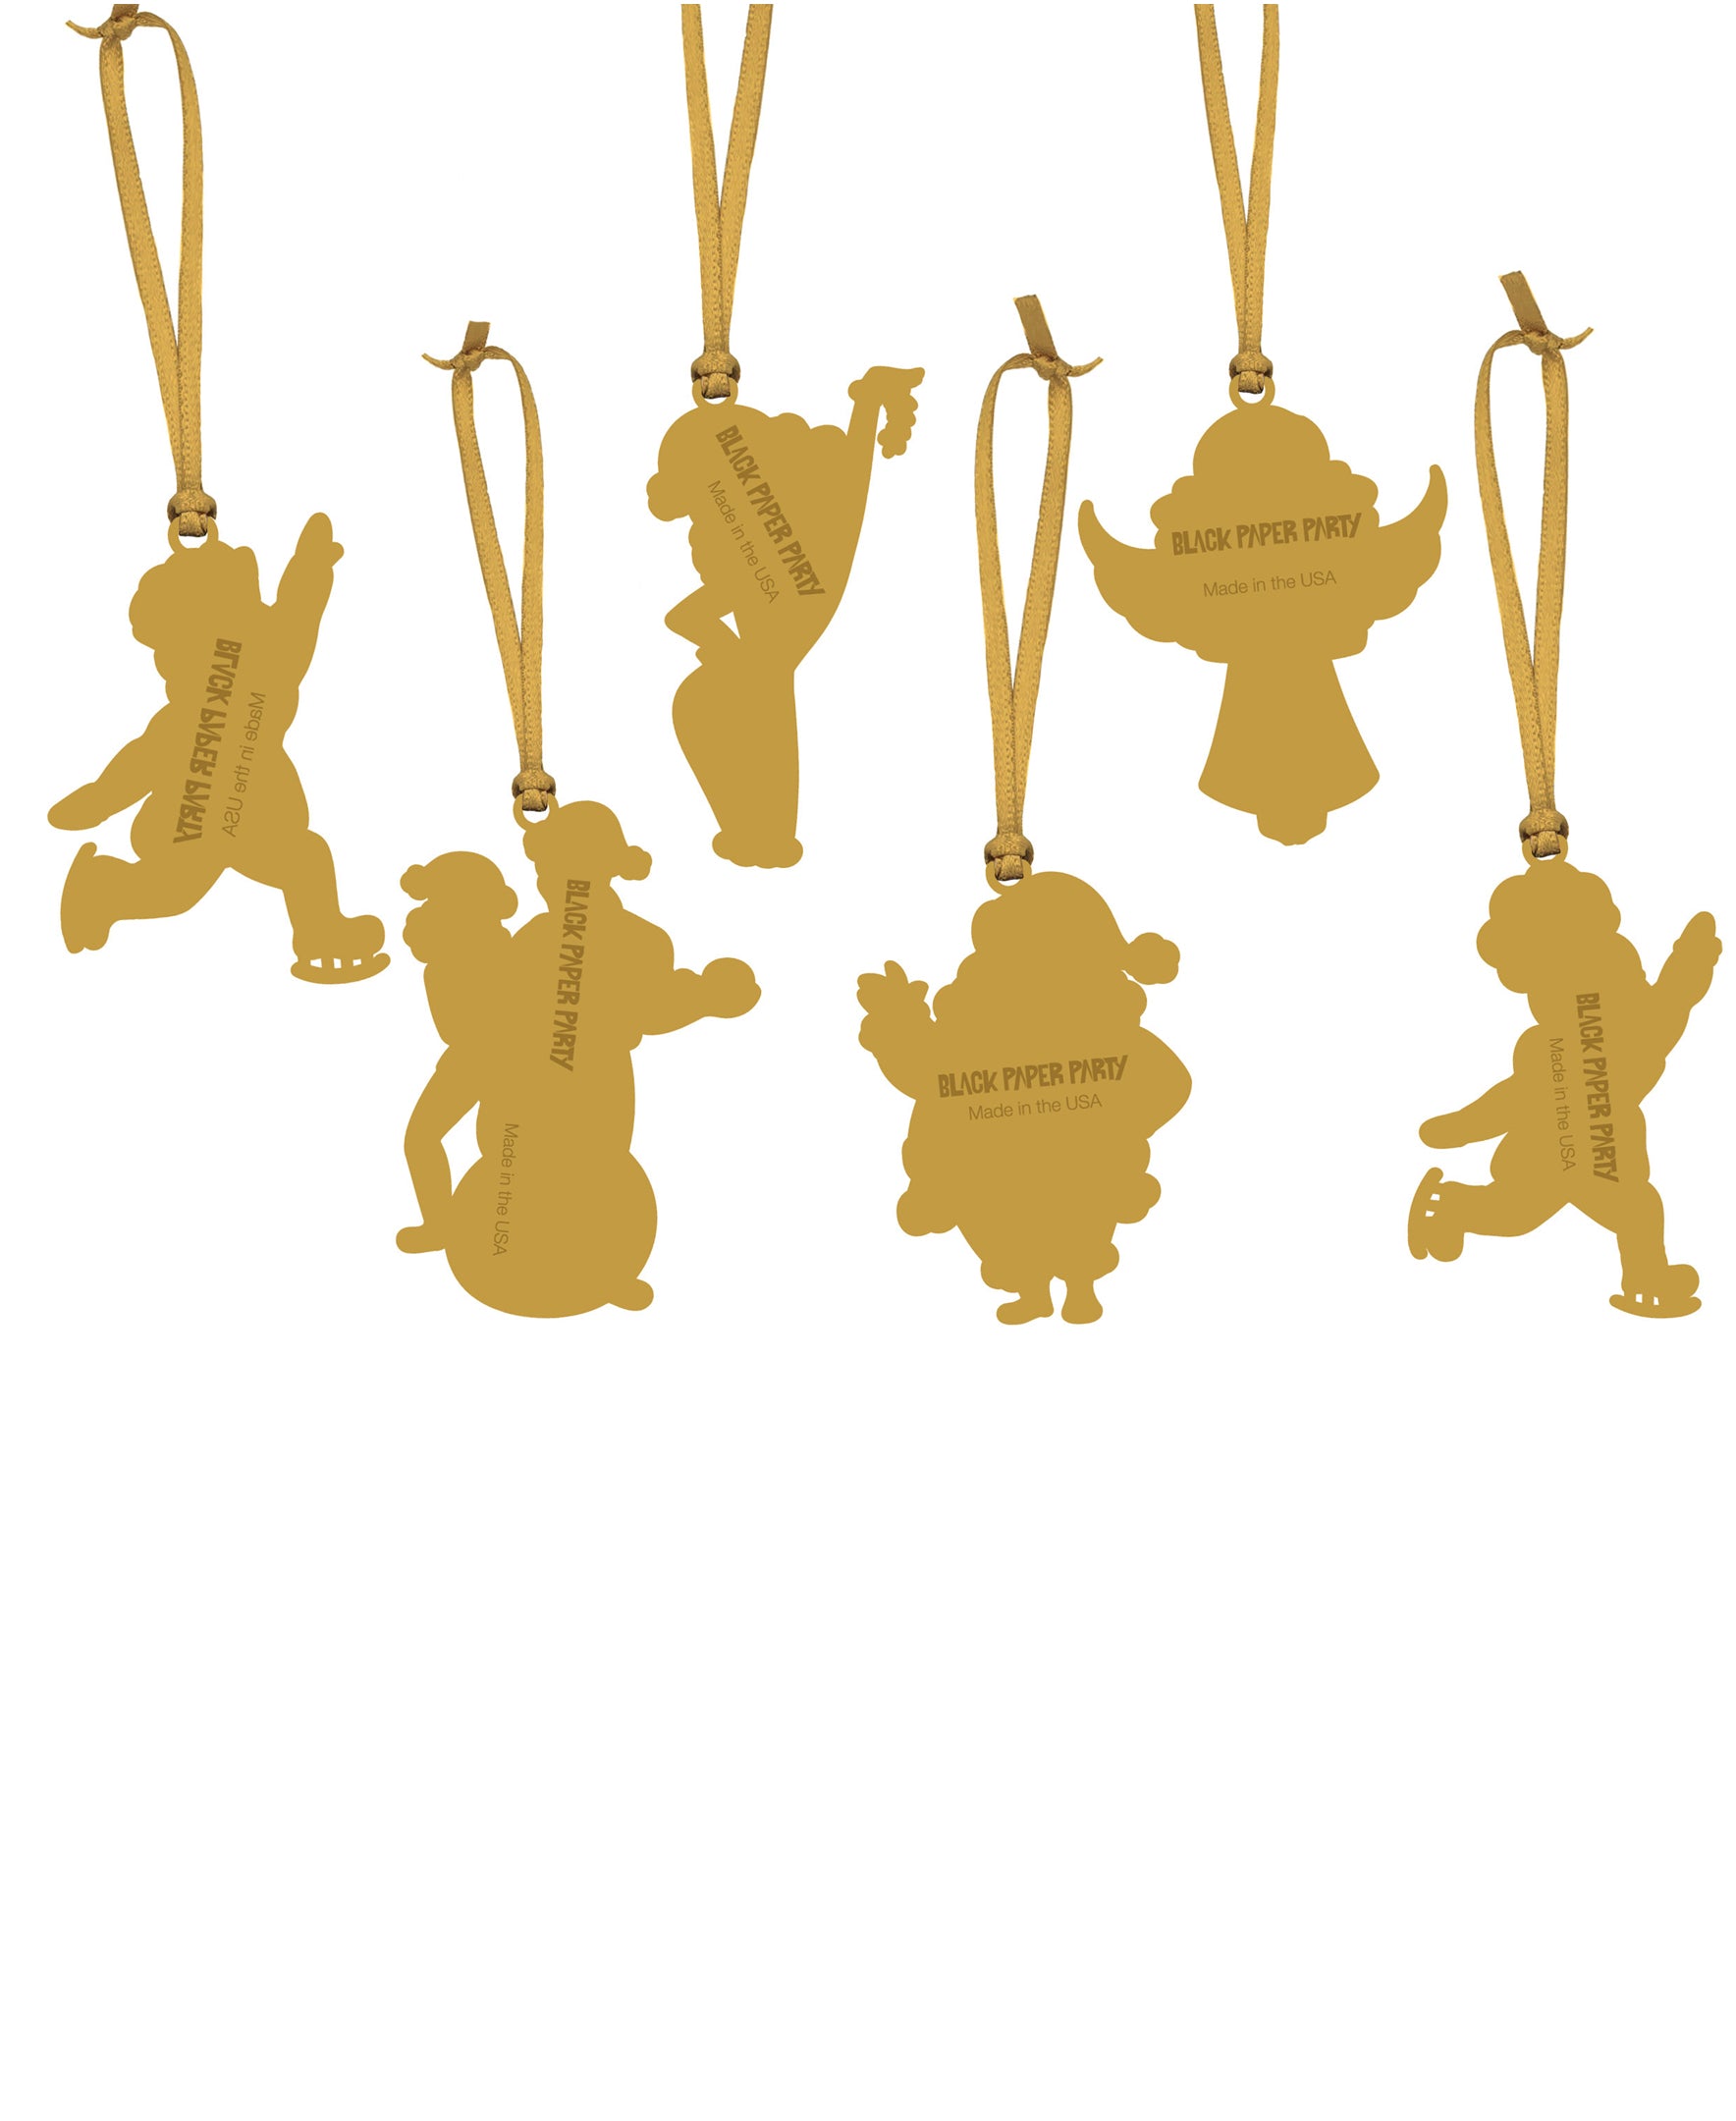 6 gold ornament back silhouettes. Each ornament has an attached ribbon for hanging